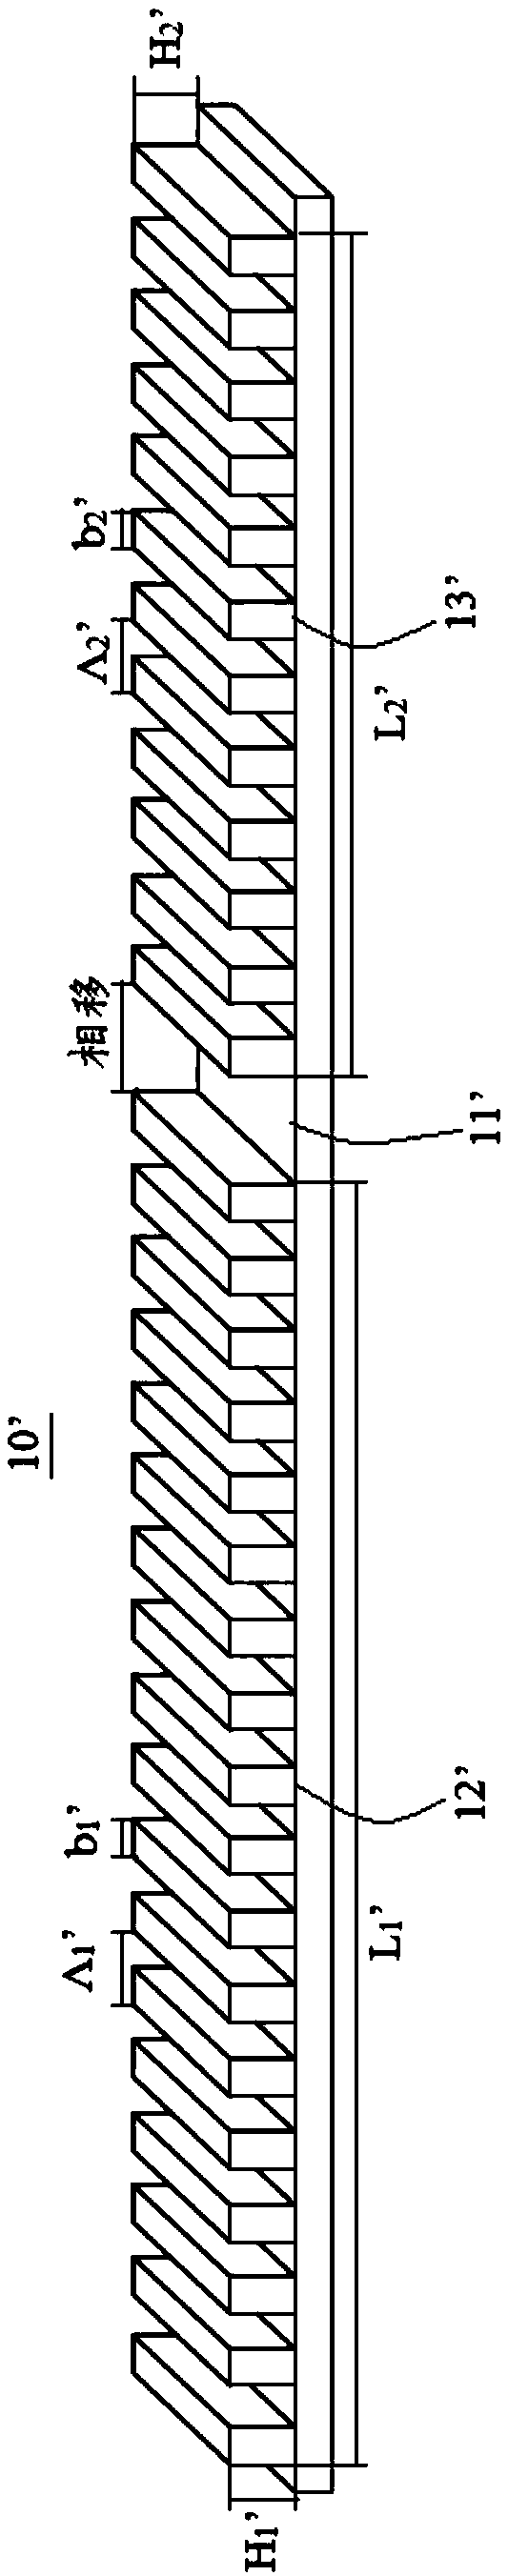 Phase shift grating of asymmetric structure and DFB semiconductor laser